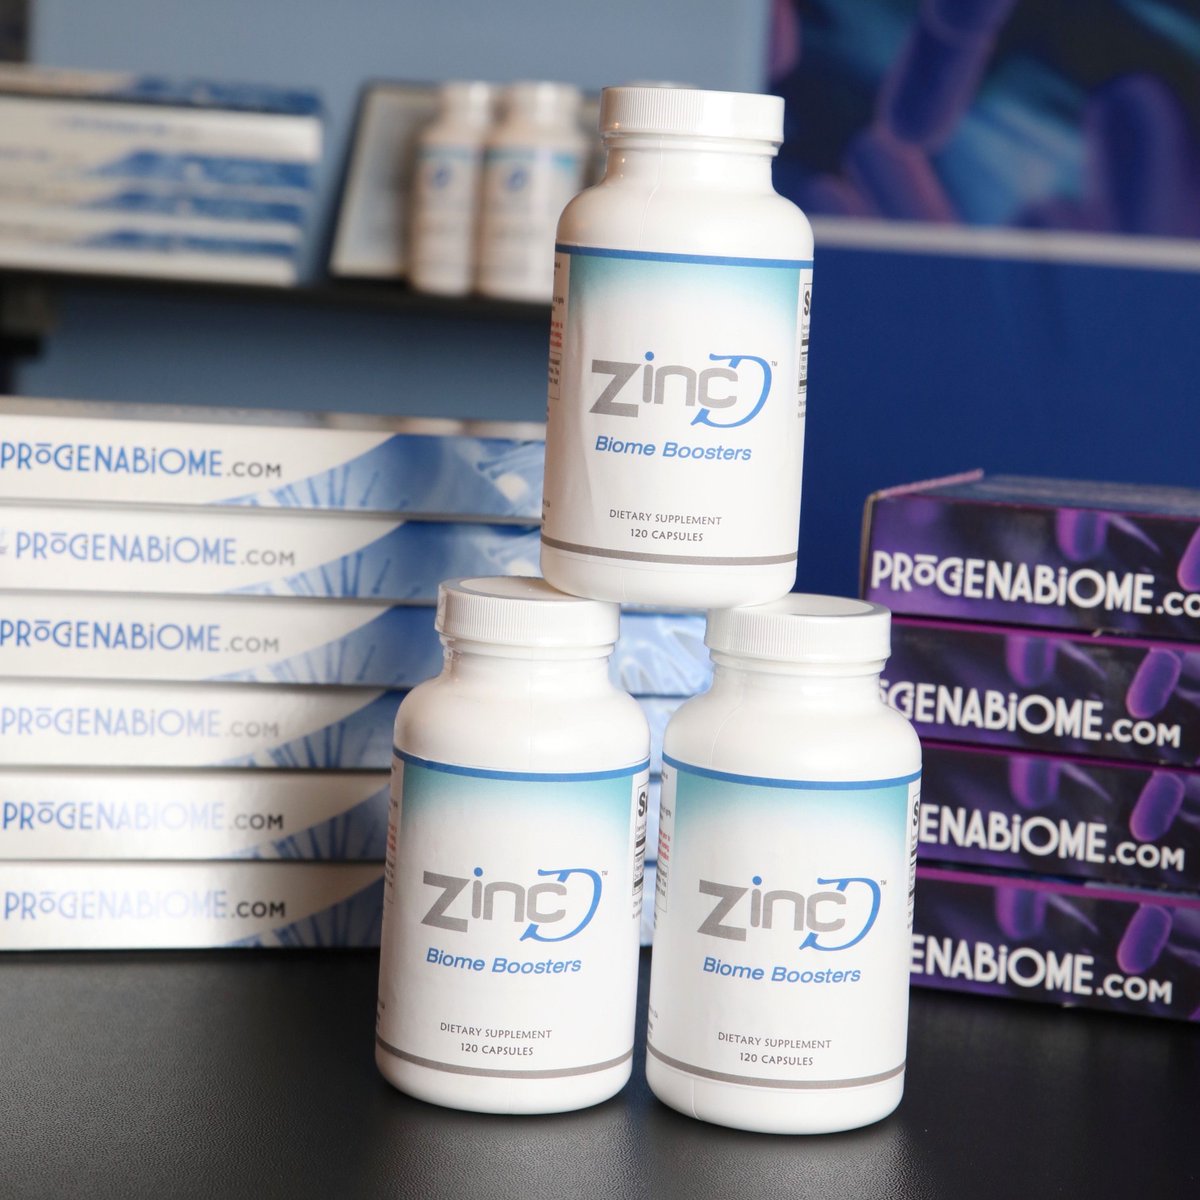 Supporting your #microbiome is an important part of supporting your overall health. Tested and proven effective by Progenabiome, these Biome Boosters contain Vitamin C, Vitamin D and Zinc to help strengthen immunity within your gut biome. 💊 Order now: bit.ly/3fcMDt1.